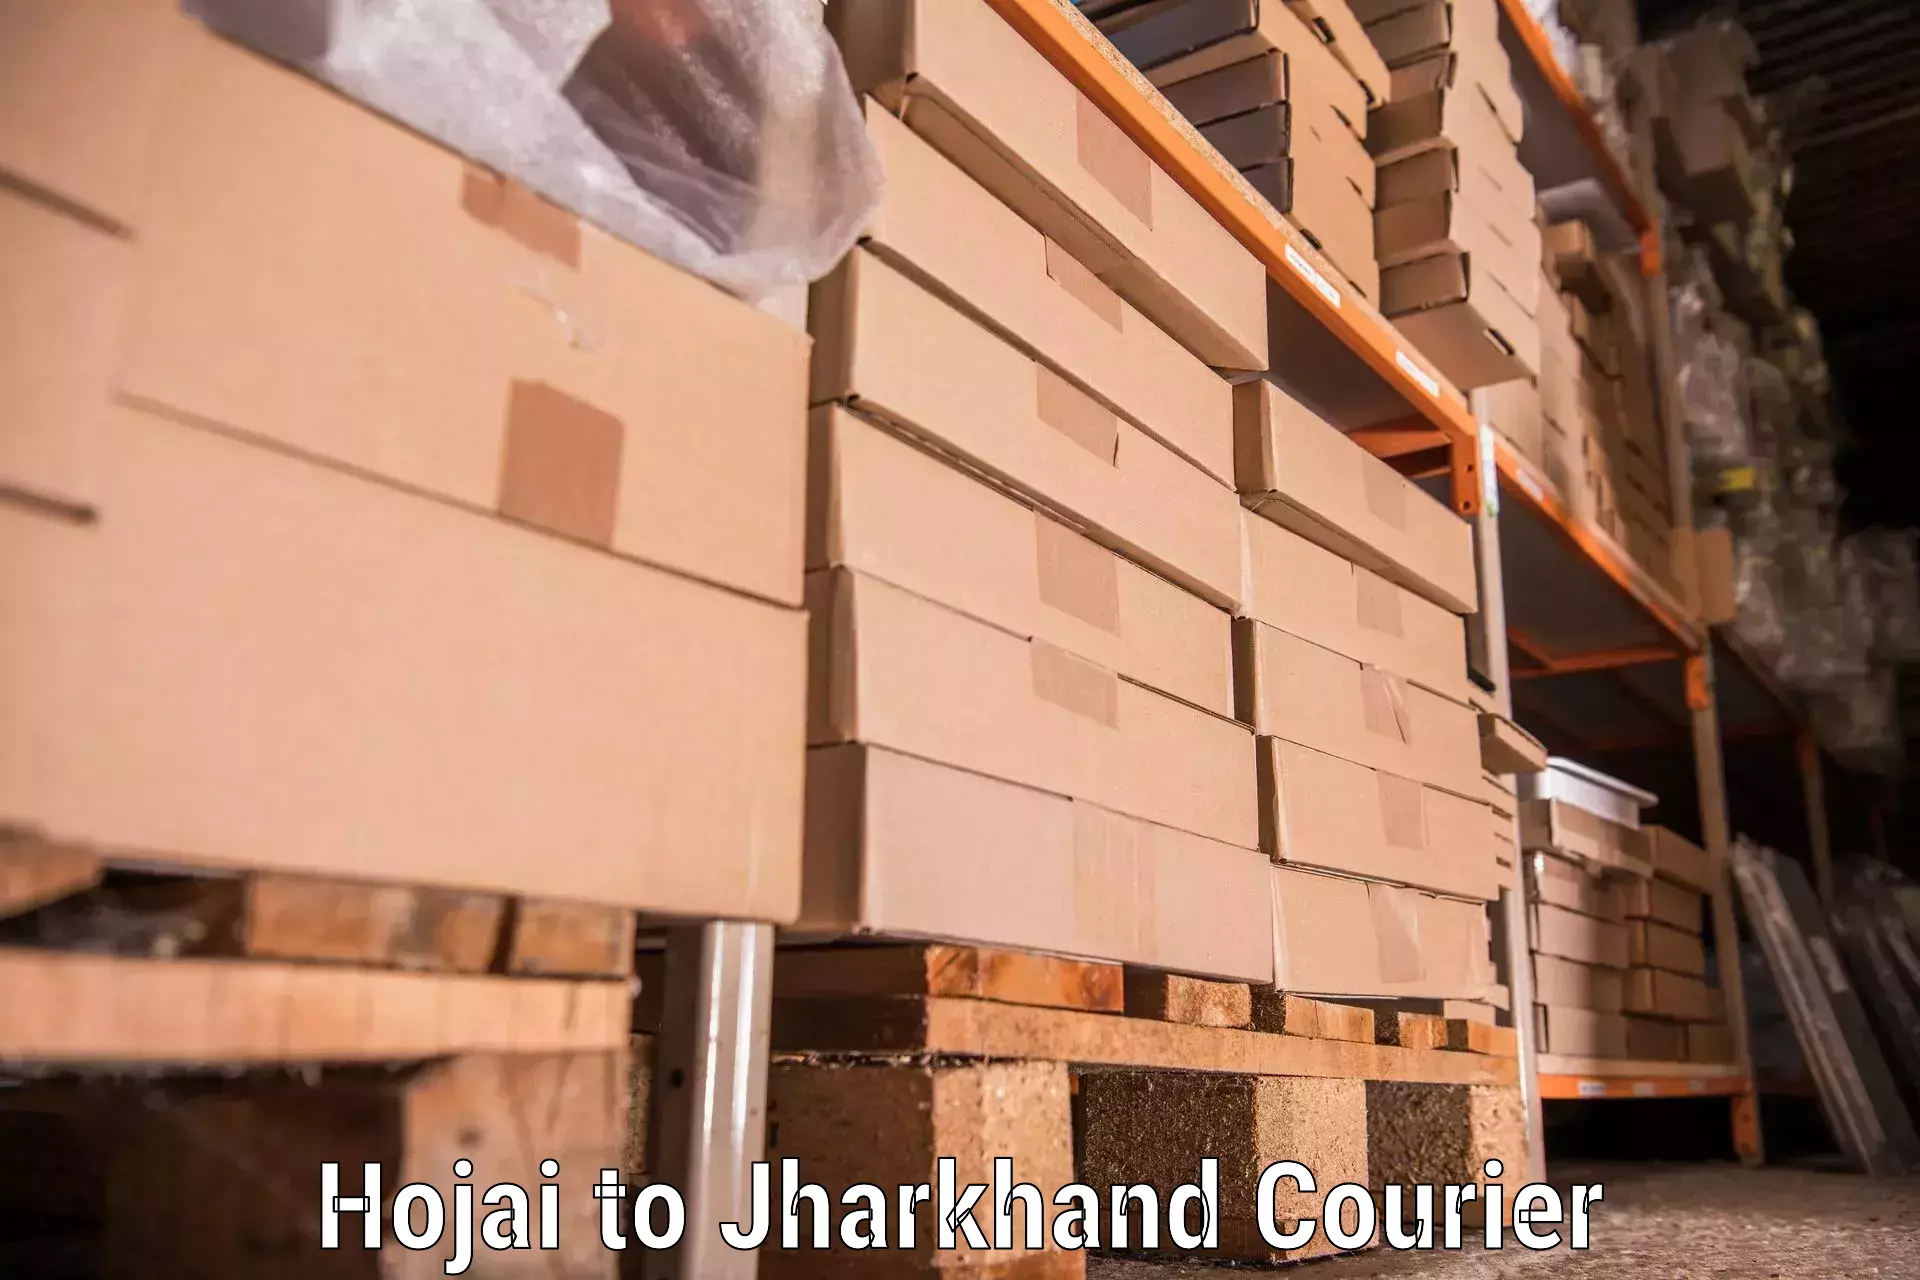 Furniture transport specialists Hojai to Jharkhand